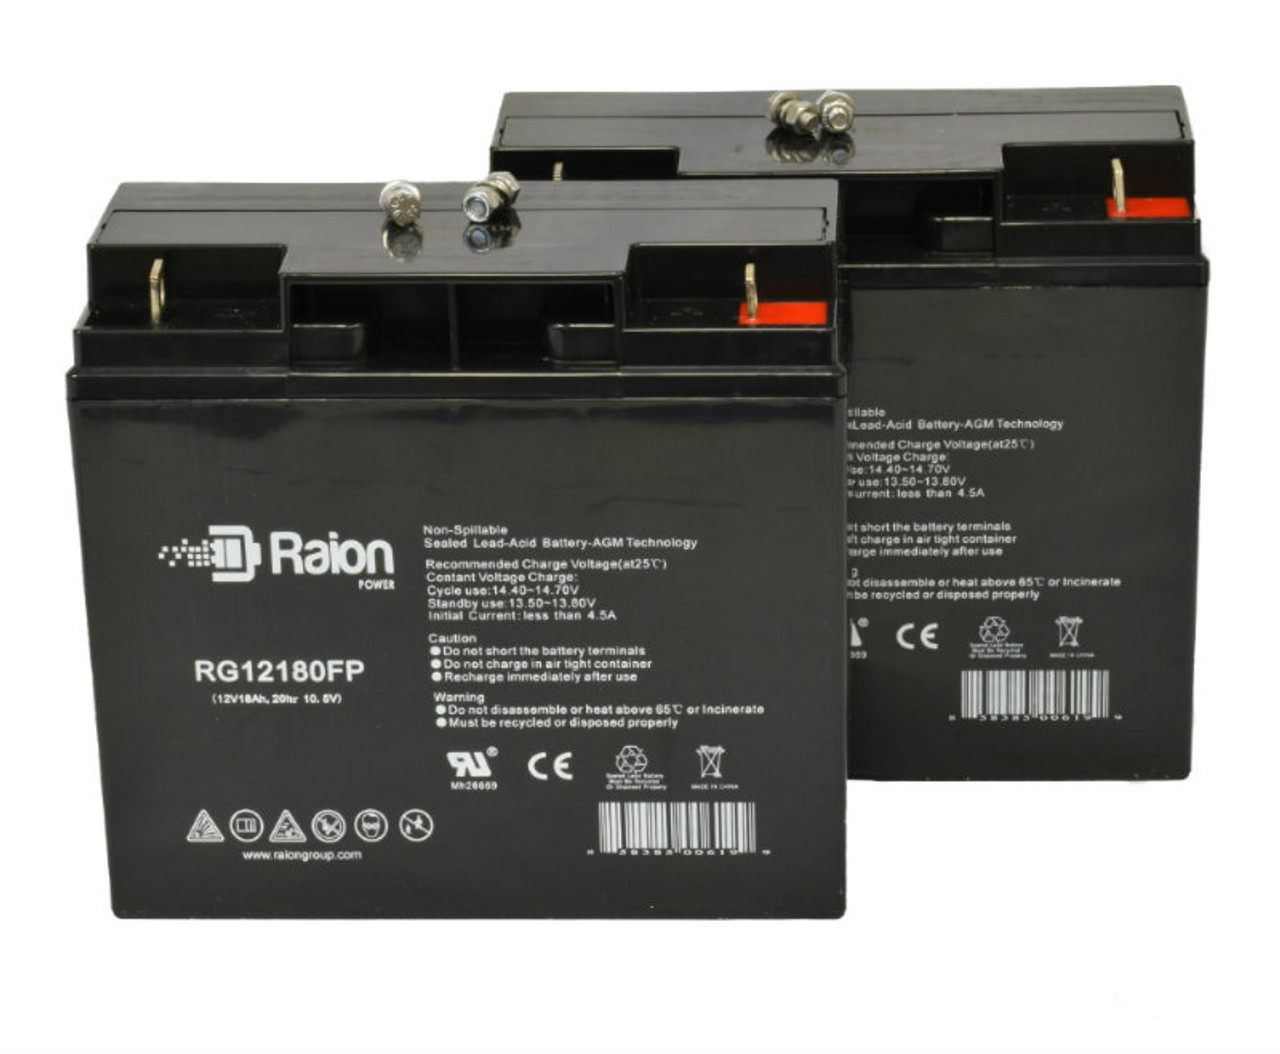 Raion Power Replacement RG12180FP 12V 18Ah Emergency Light Battery for Simplex 20819275 - 2 Pack